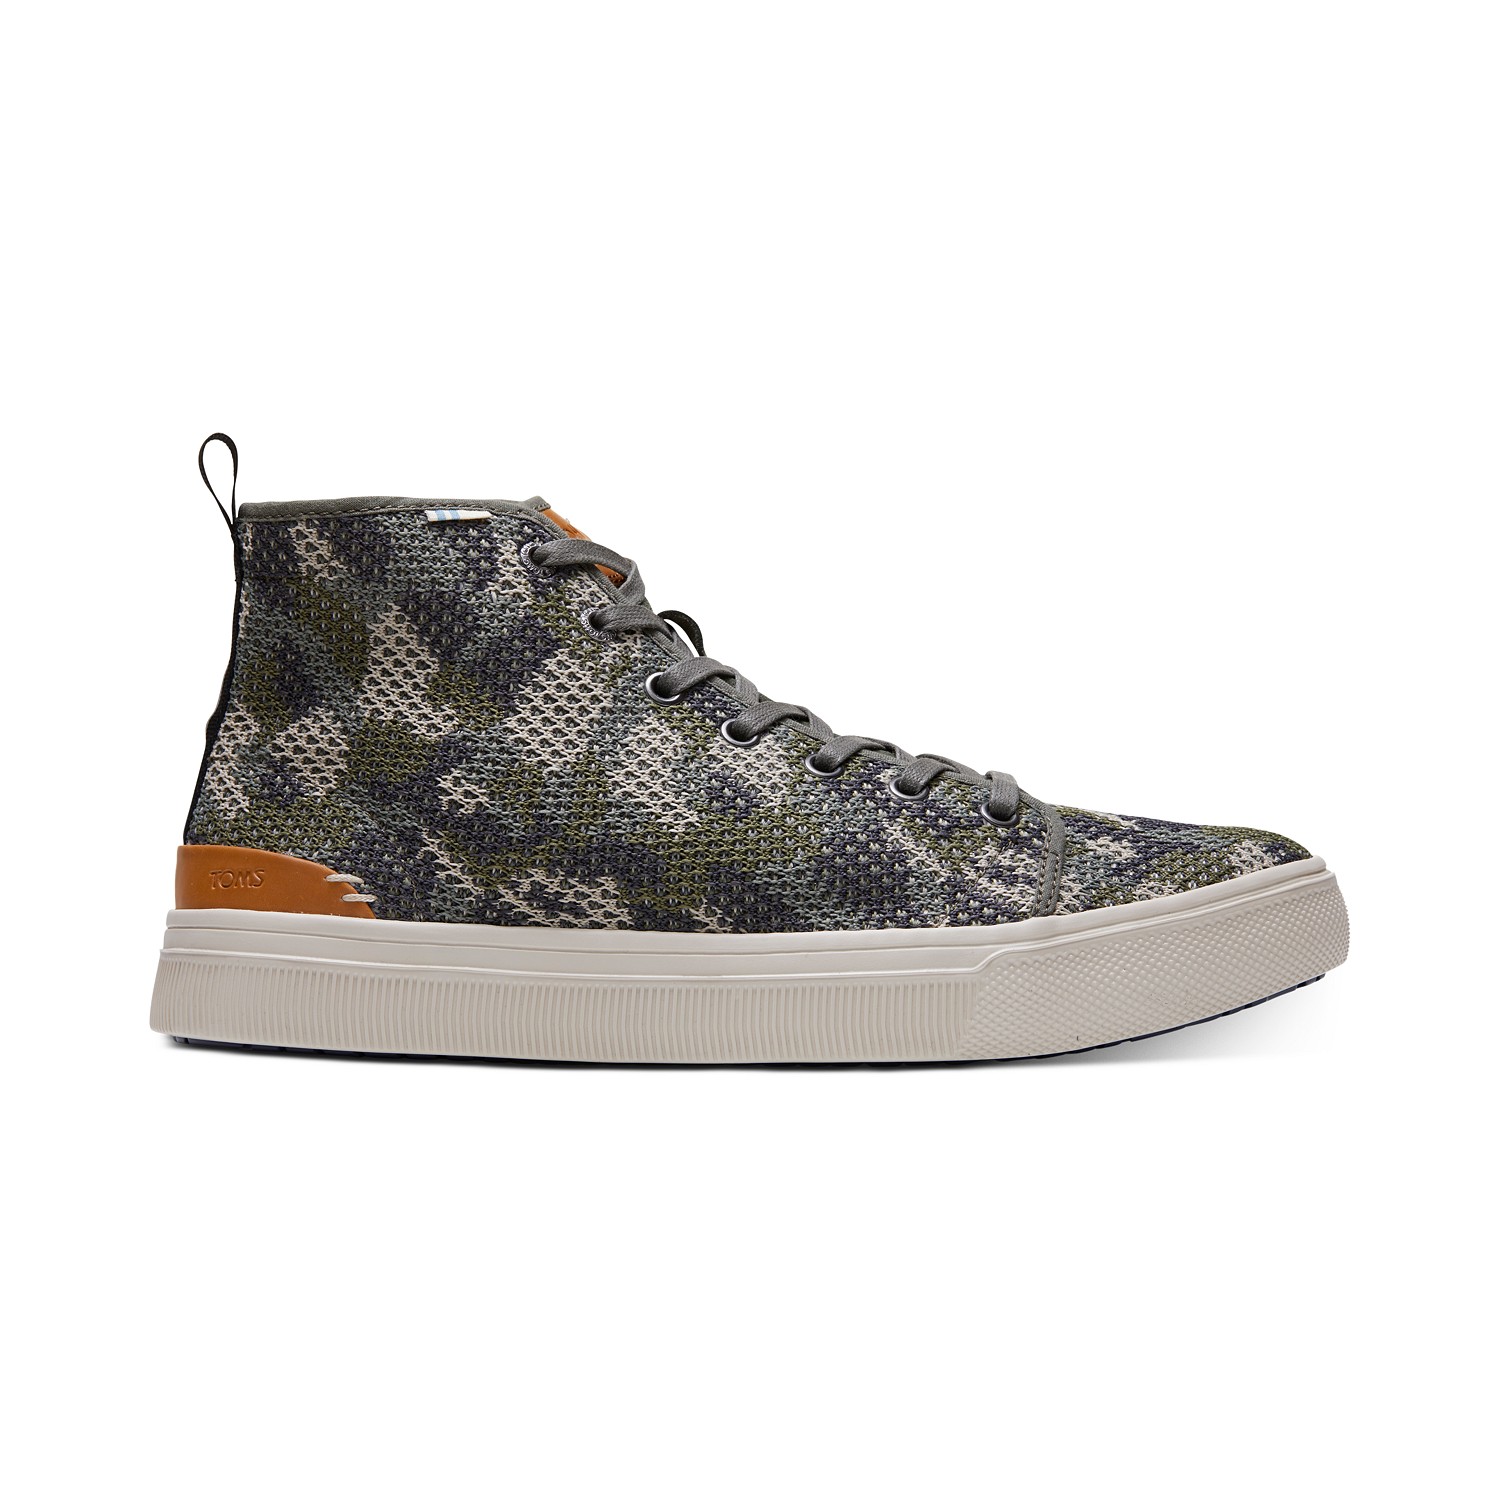 woocommerce-673321-2209615.cloudwaysapps.com-toms-mens-green-camouflage-travel-lite-high-top-sneakers